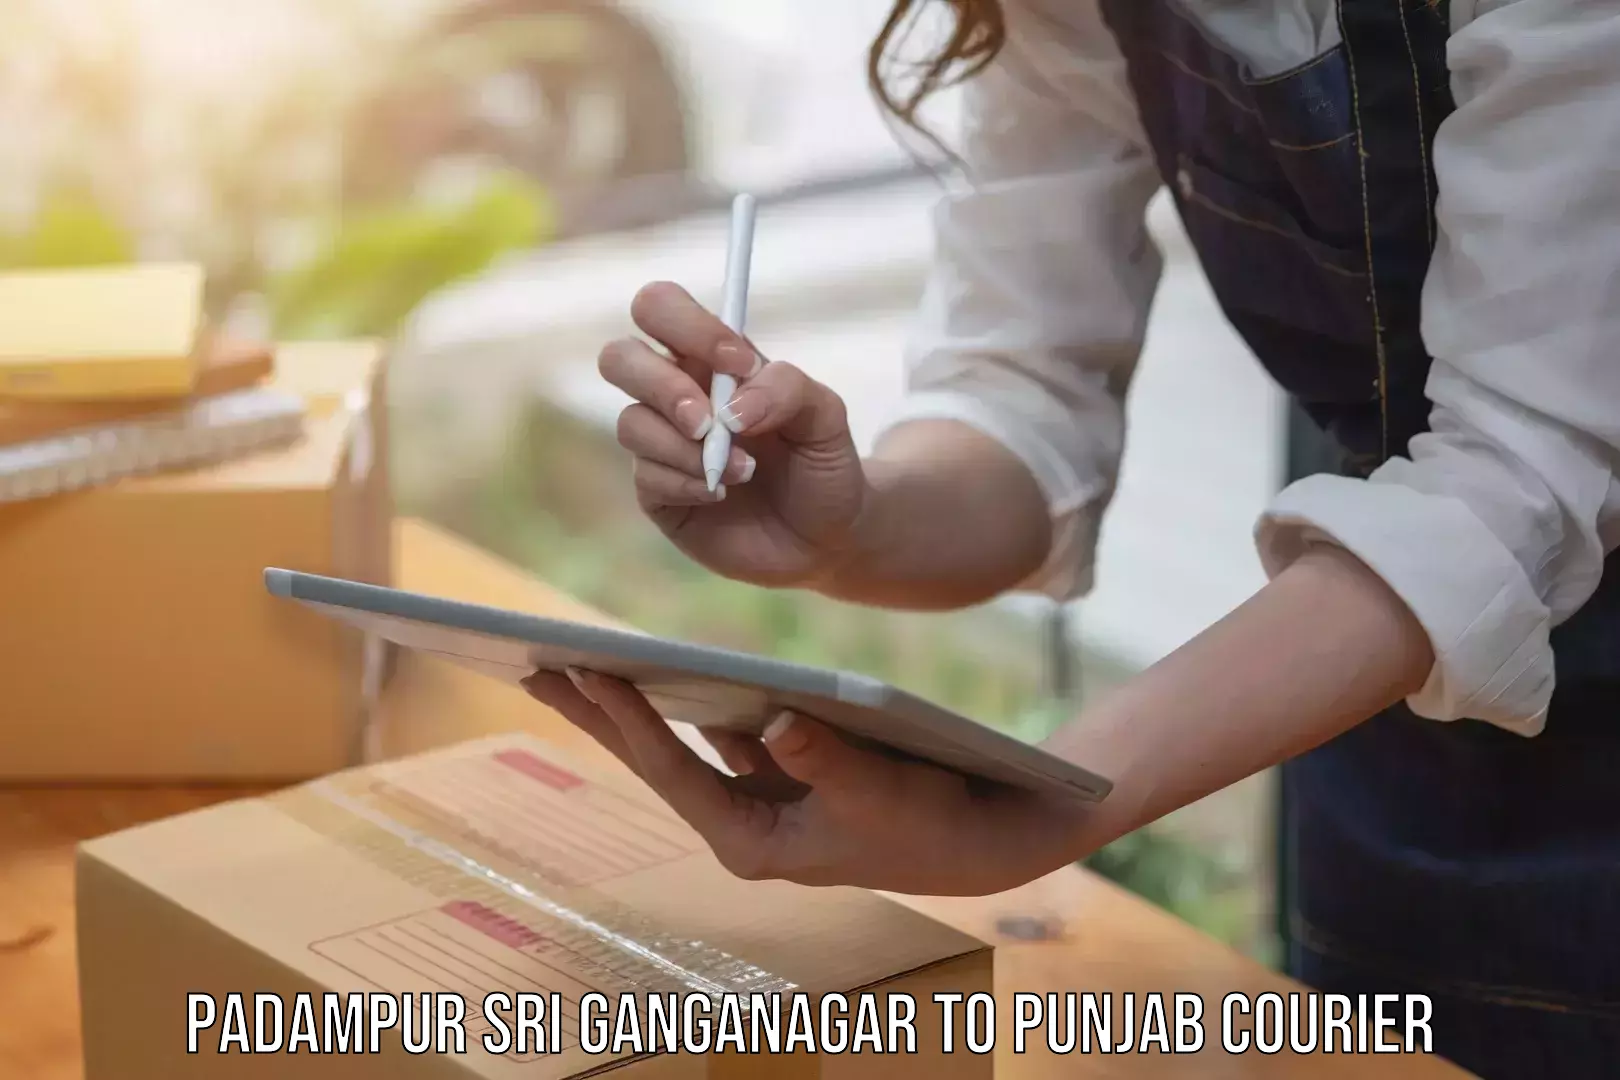 Personalized courier experiences Padampur Sri Ganganagar to Dharamkot